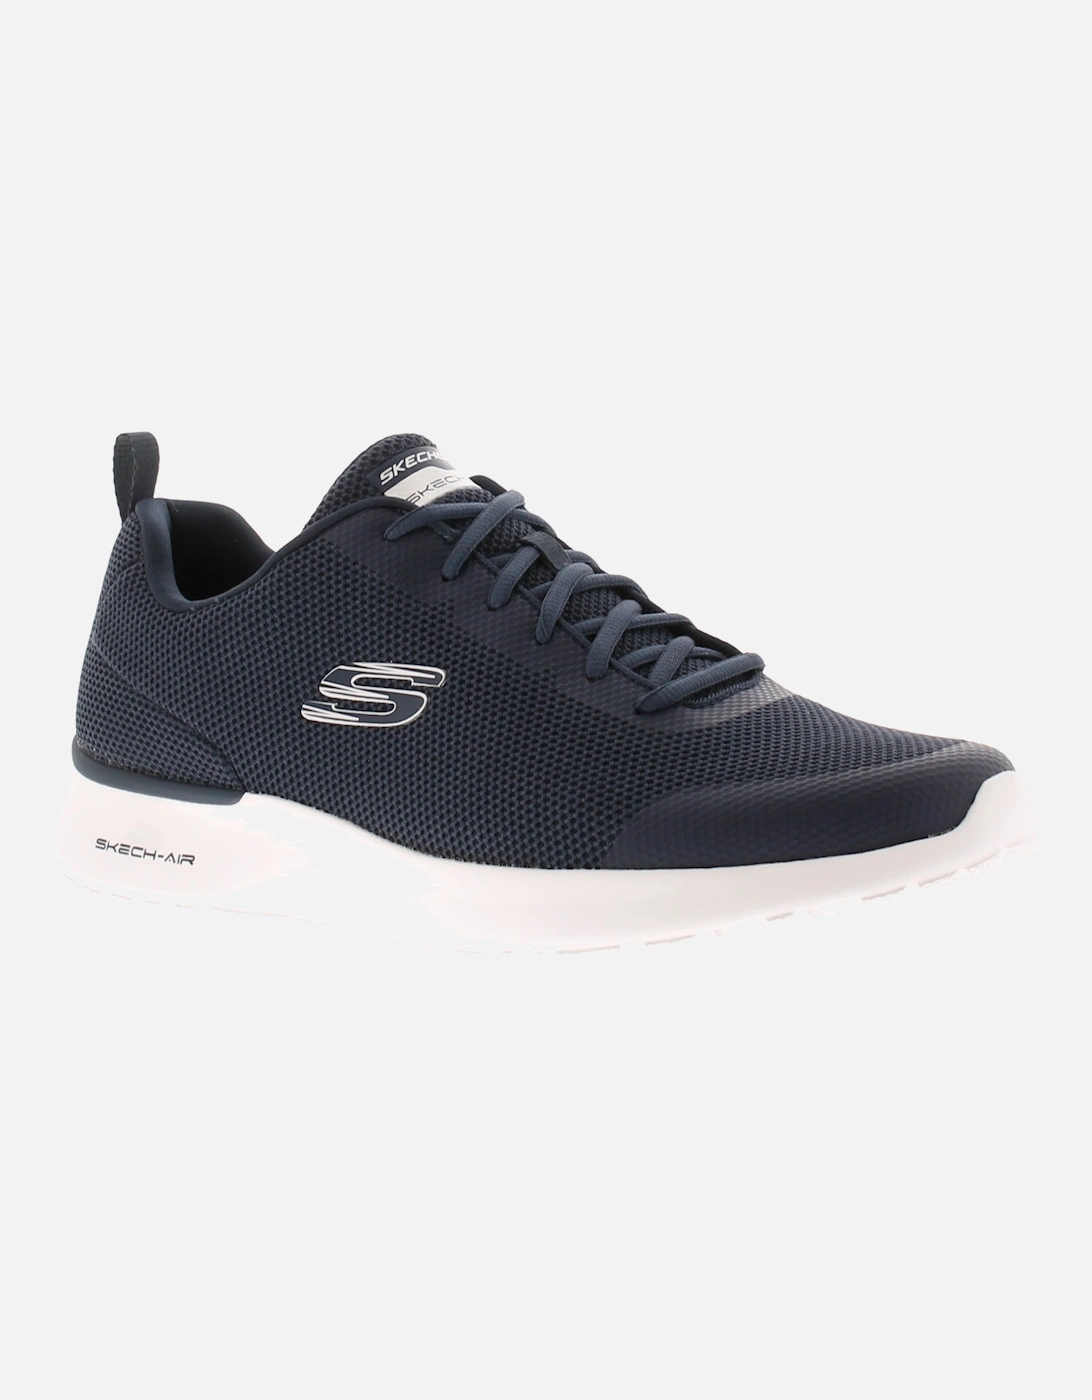 Mens Trainers Skech Air Dynamight Lace Up navy UK Size, 6 of 5